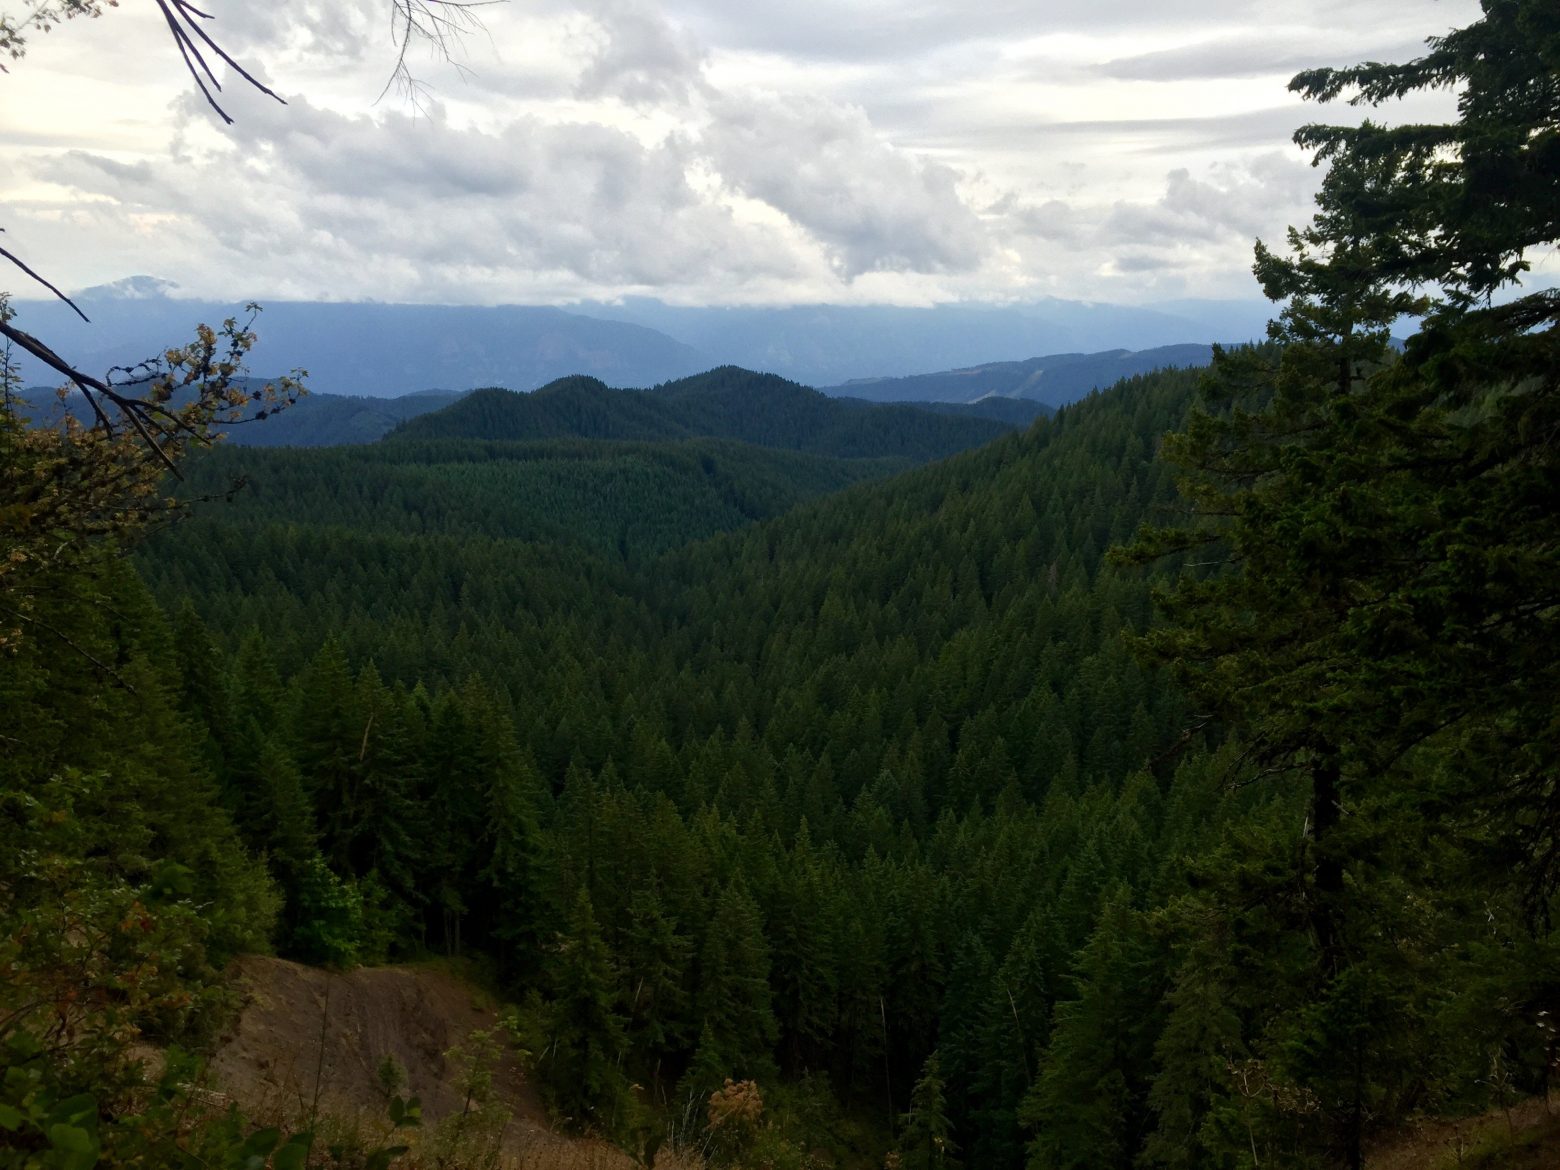 Forests of evergreens extending into the distance